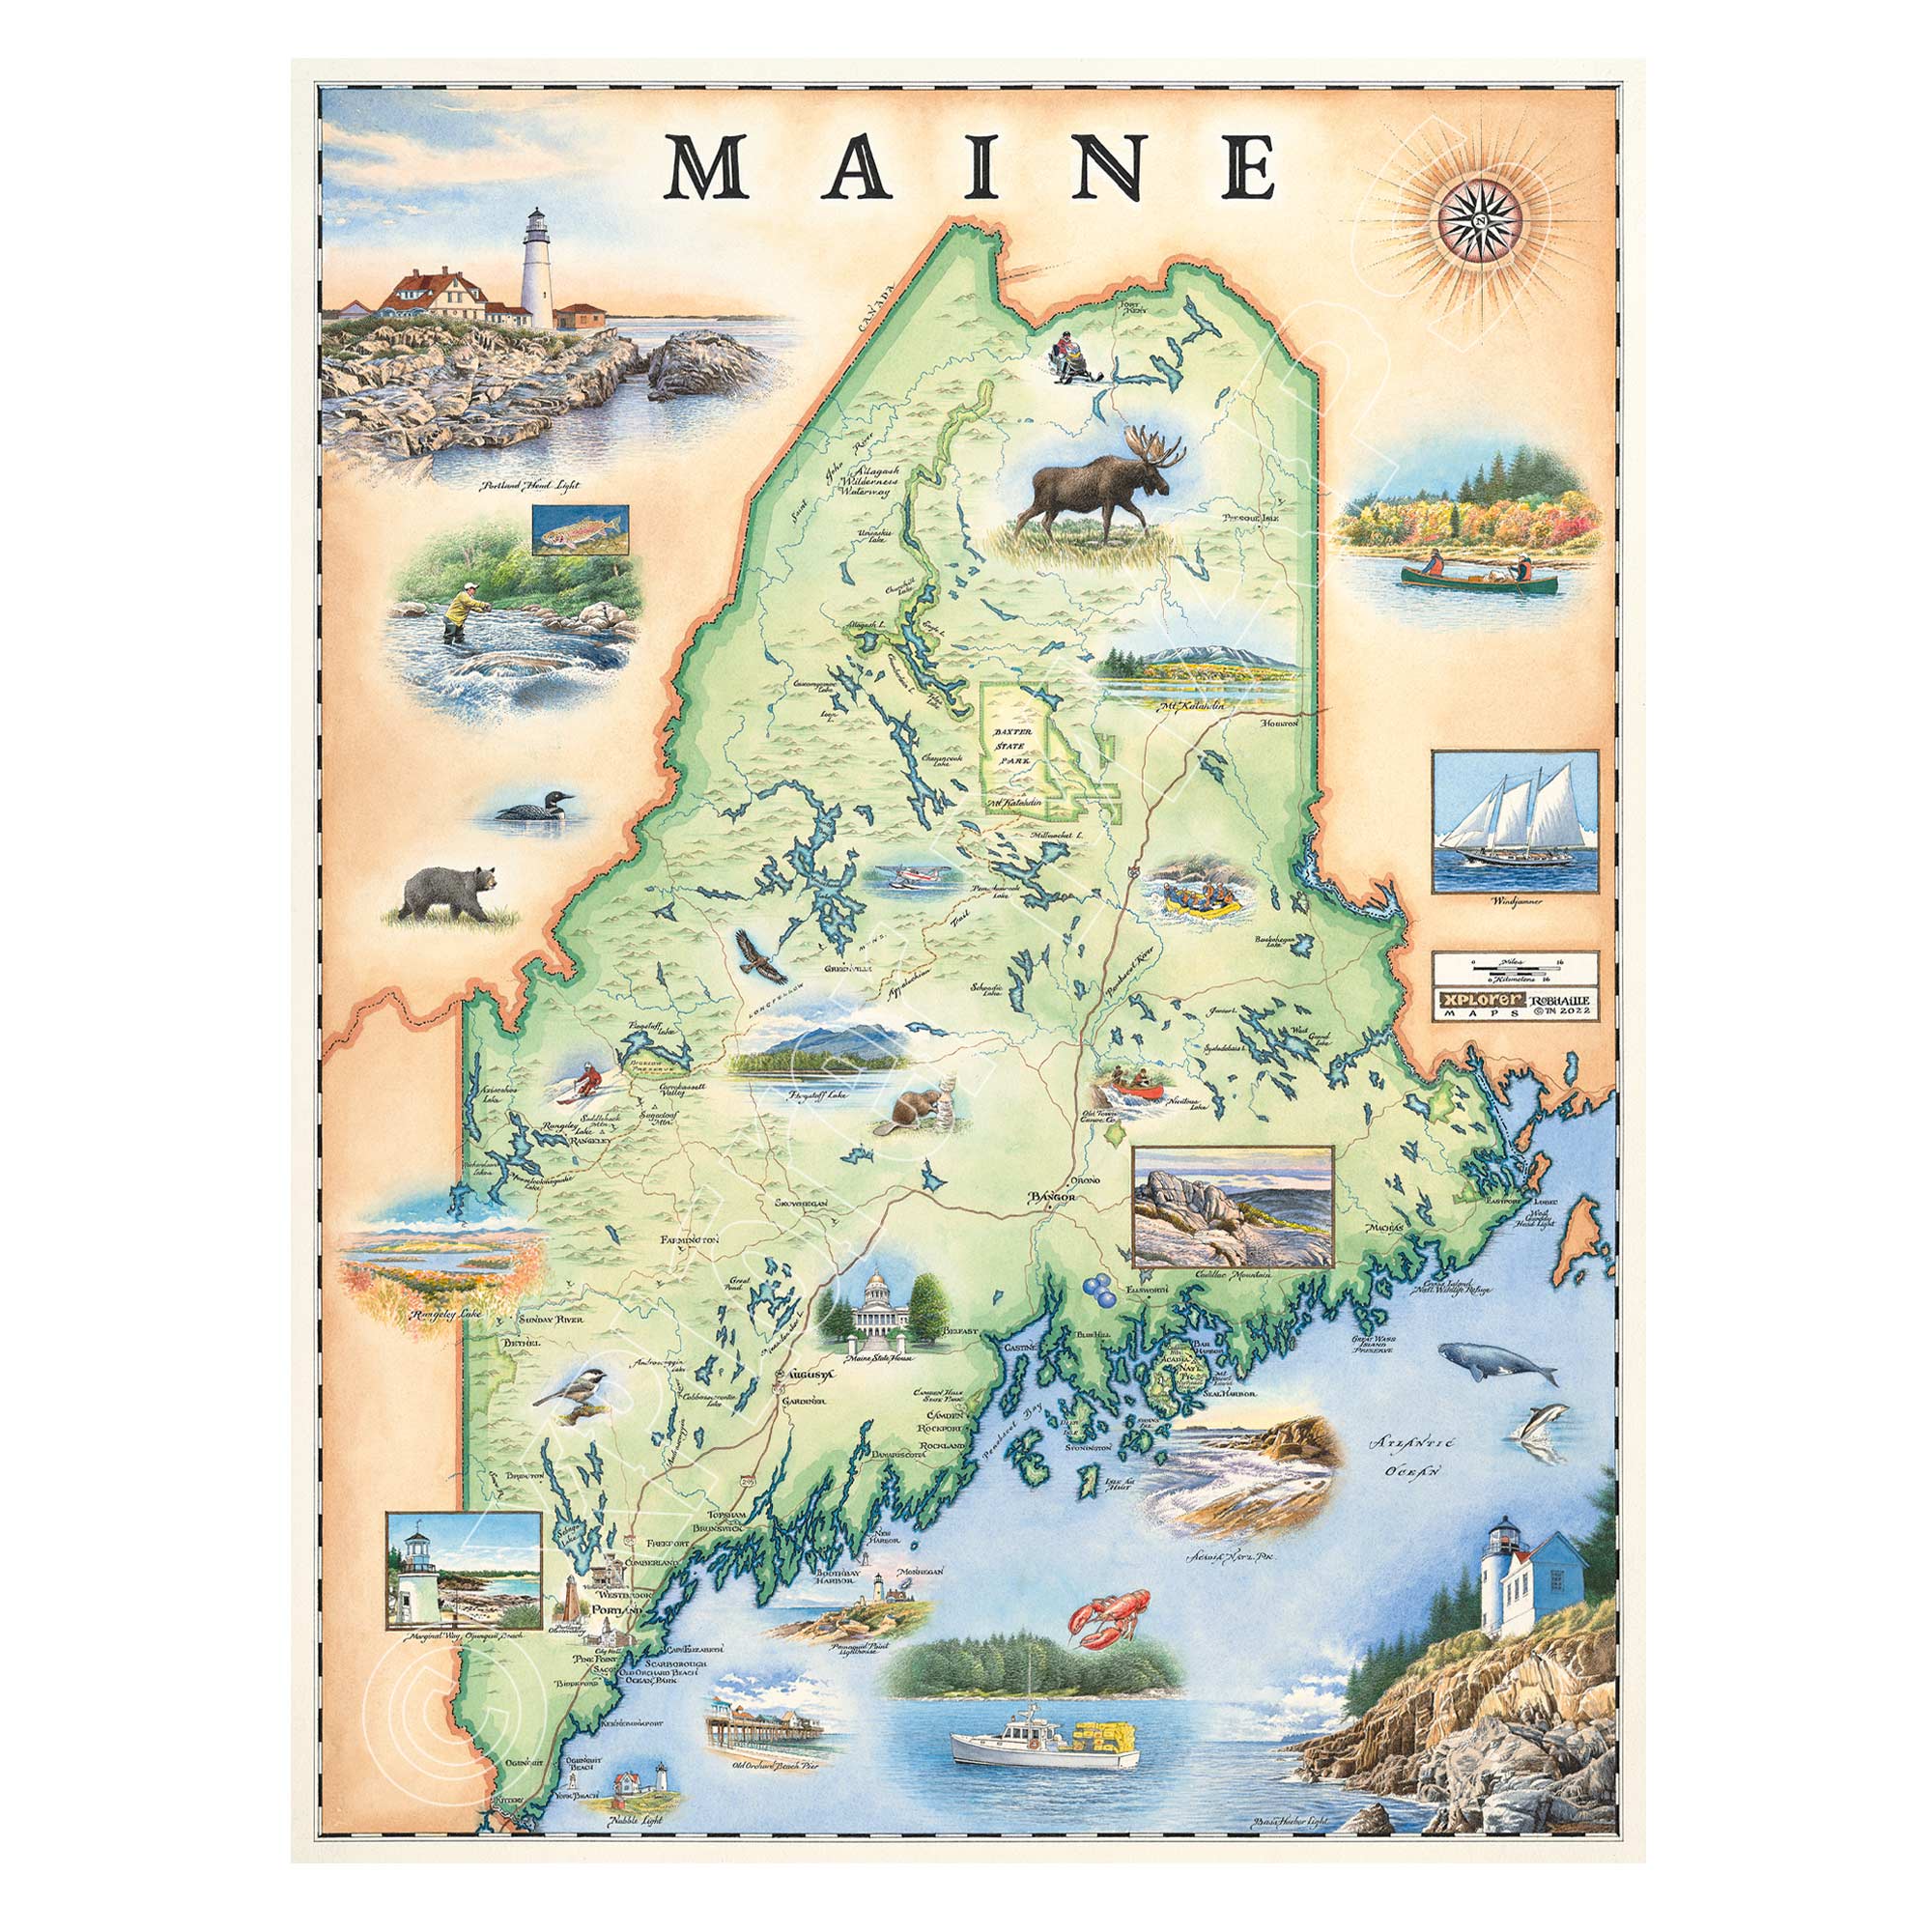 Maine state hand-drawn map in earth tones brown and green. The map features illustrations of people whitewater rafting, fishing, and canoeing. Other illustrations include Cadillac Mountain, Acadia National Park, and Rangeley Lake. Flora and fauna include beaver, lobster, and moose. Measures 18x24.